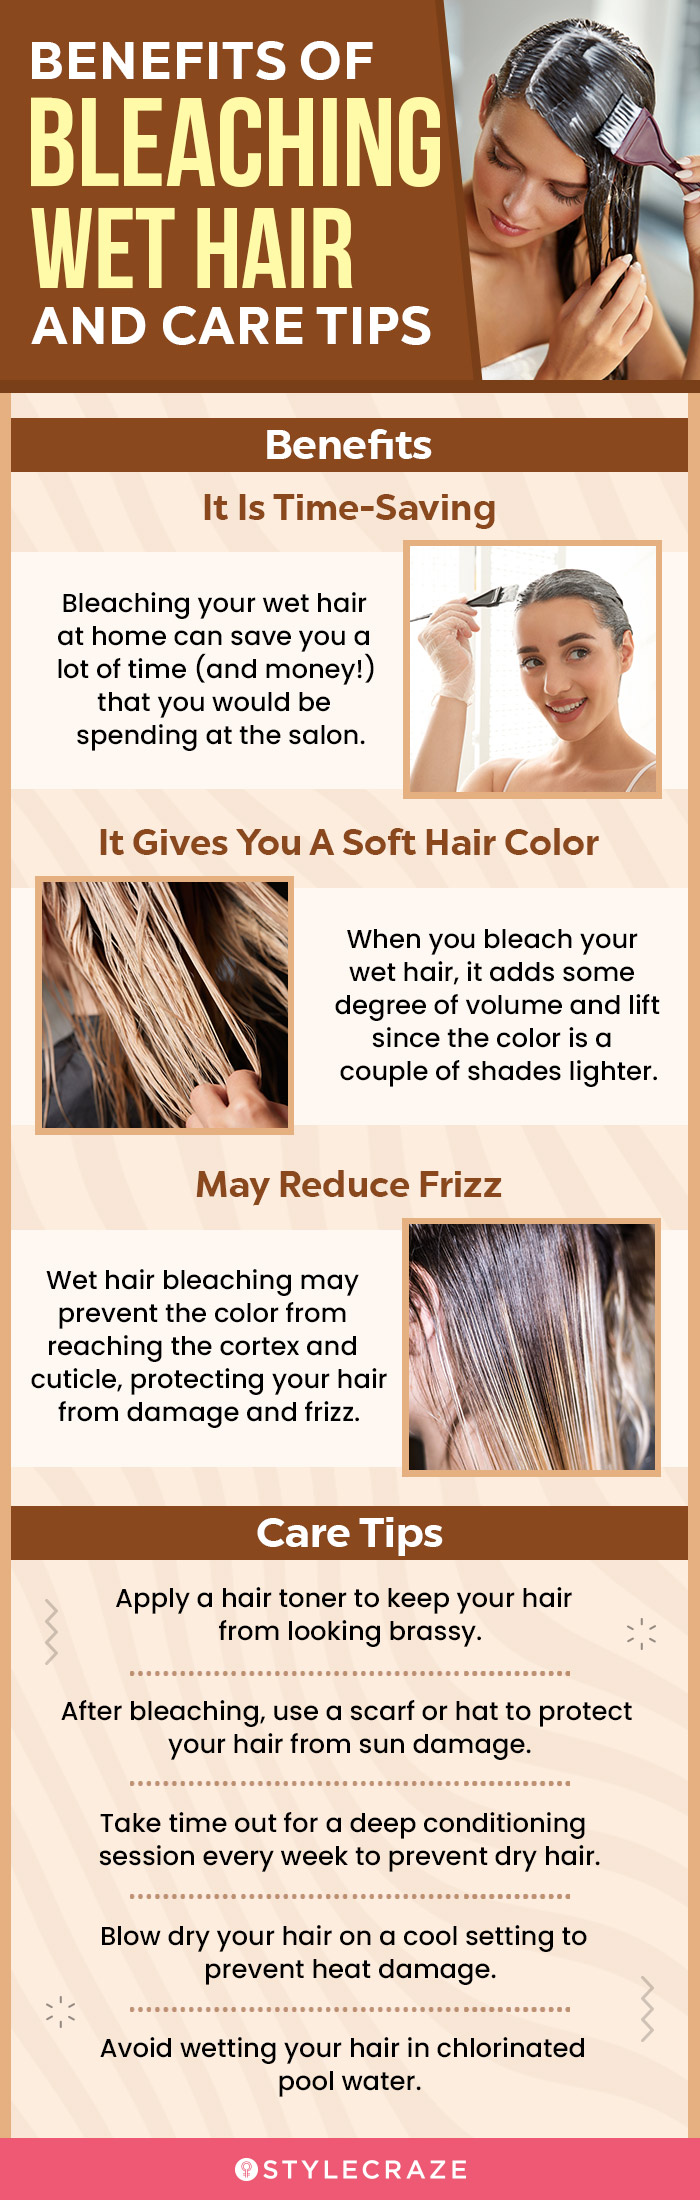 benefits of bleaching wet hair and care tips (infographic)